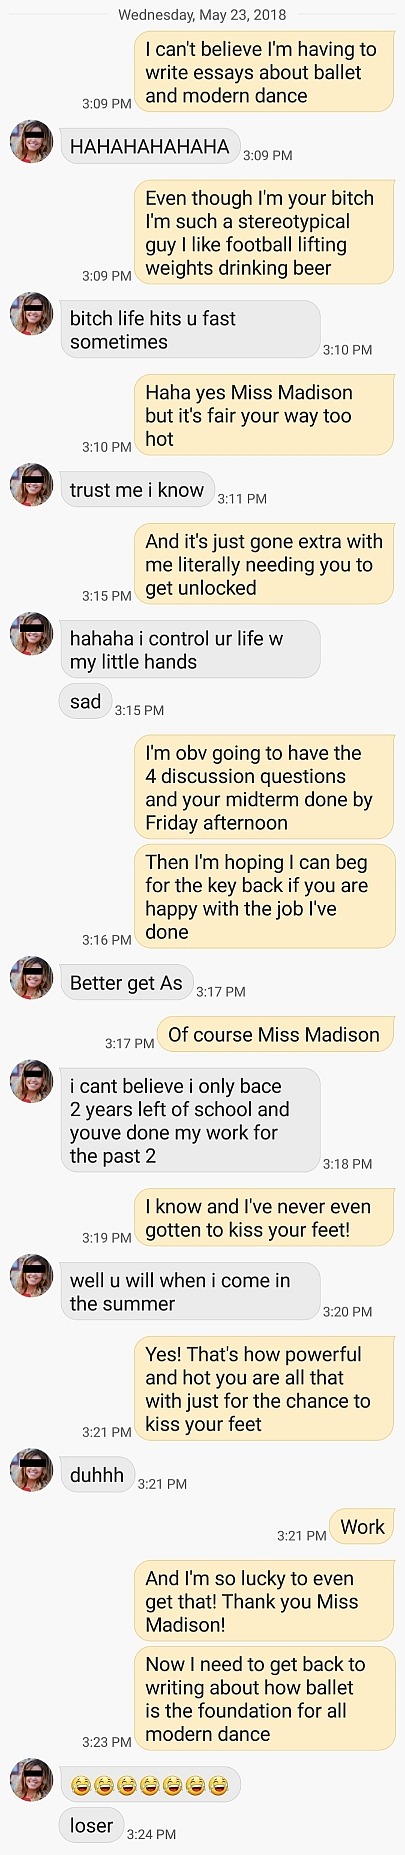 Wow, I didn&rsquo;t really realize that I&rsquo;ve been doing Miss Madison&rsquo;s